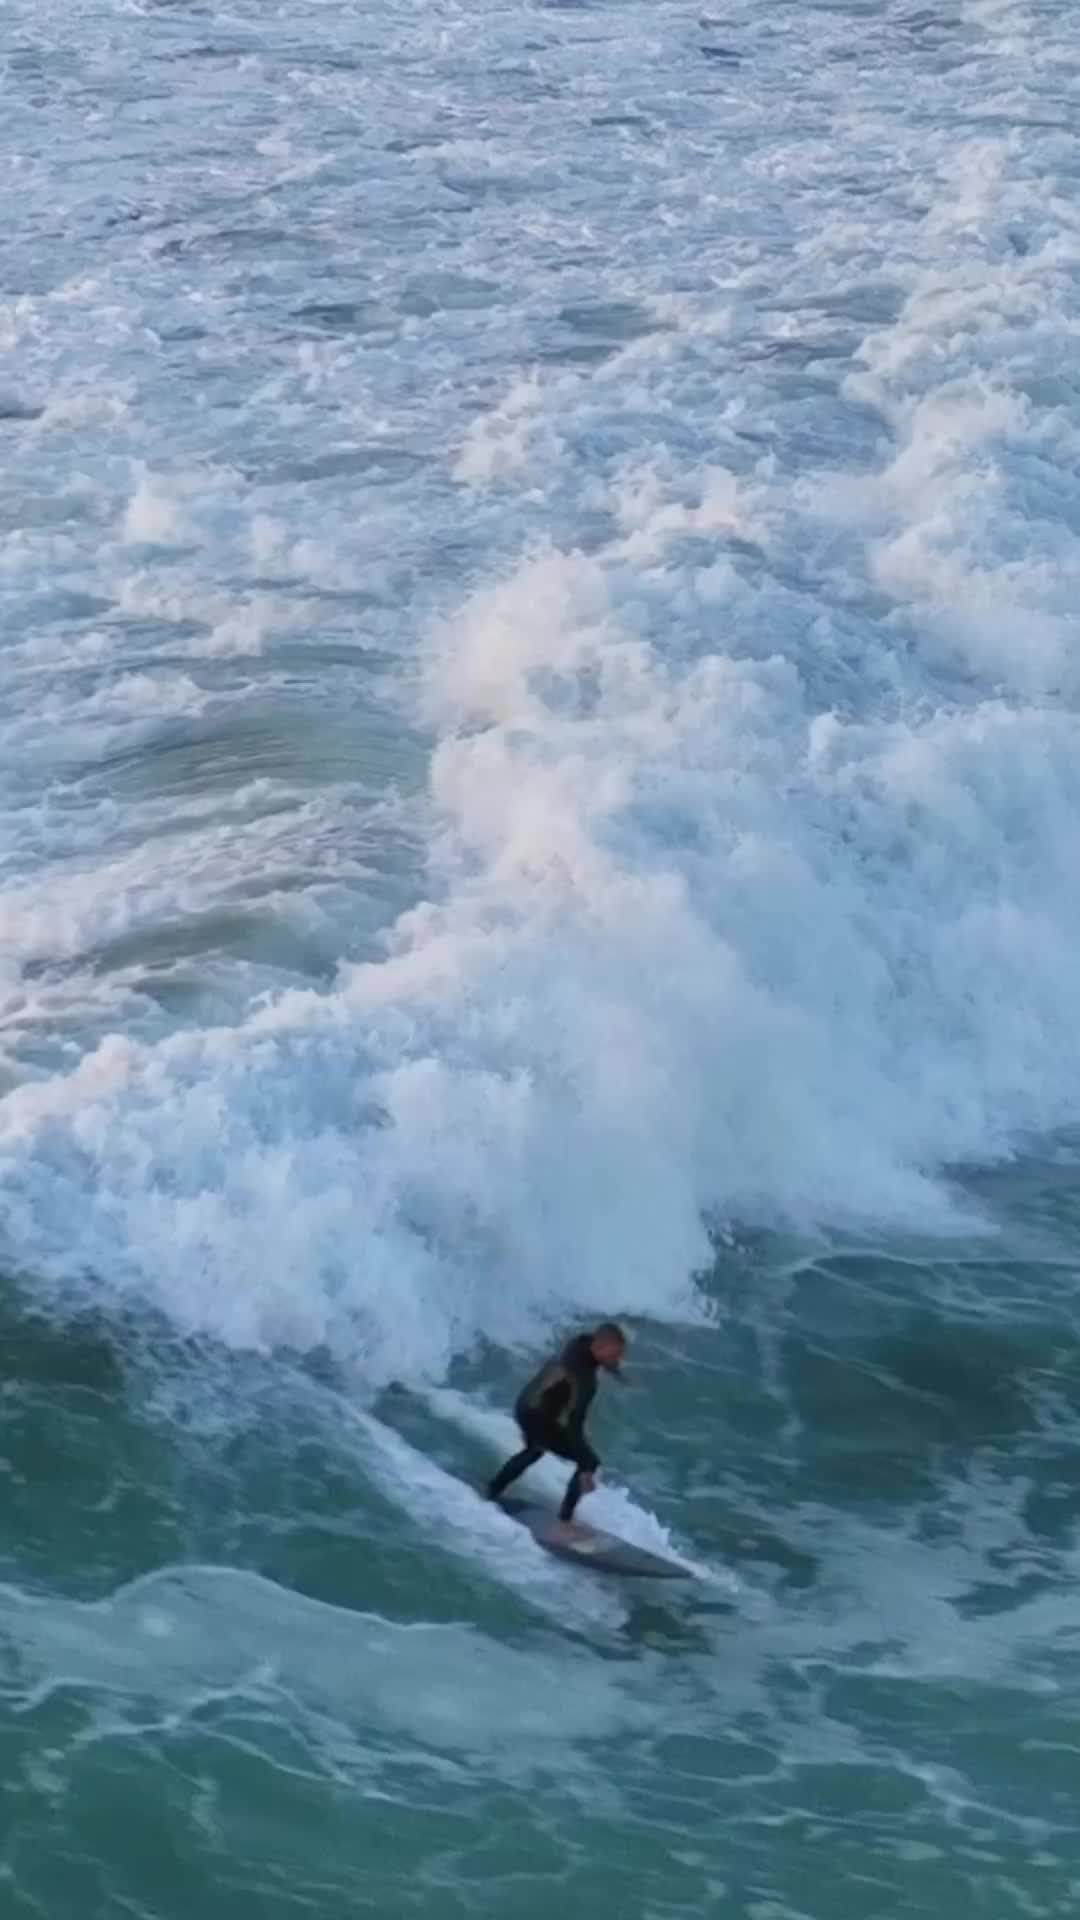 Casual Surfing at Backdoor Reef, Ericeira, Portugal